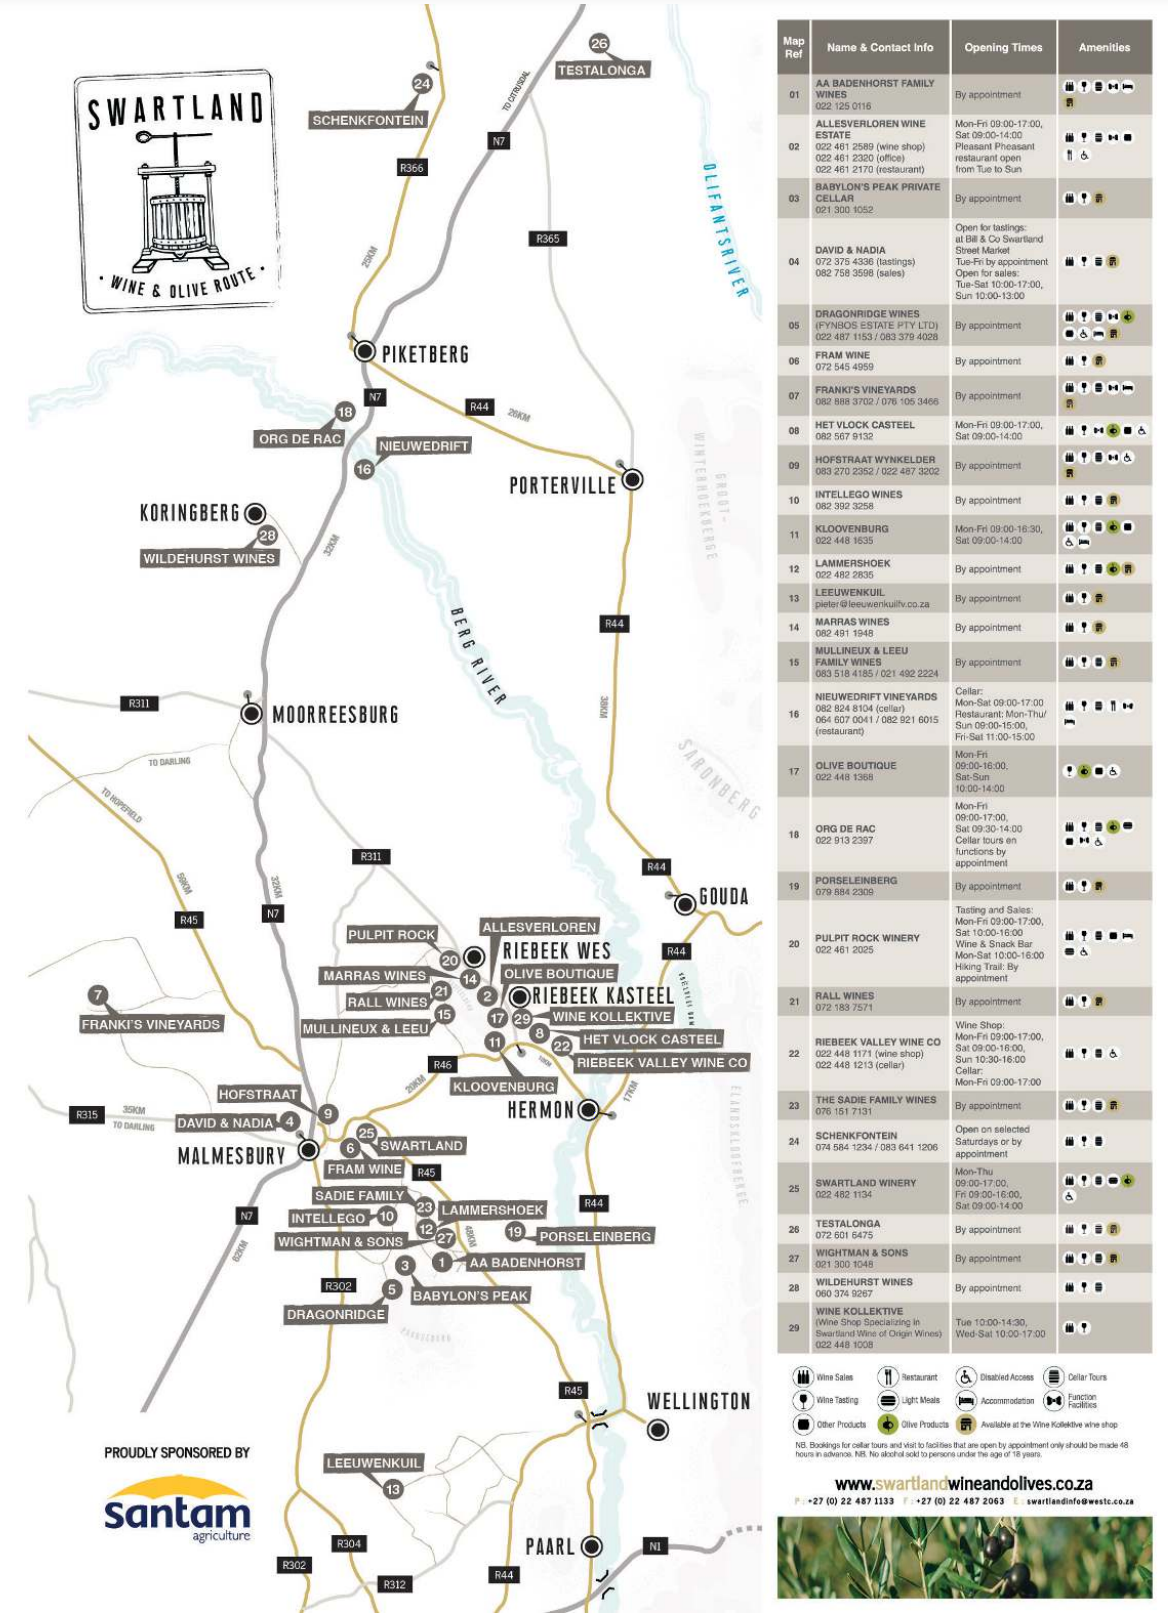 Swartland Wine & Olive Route Map